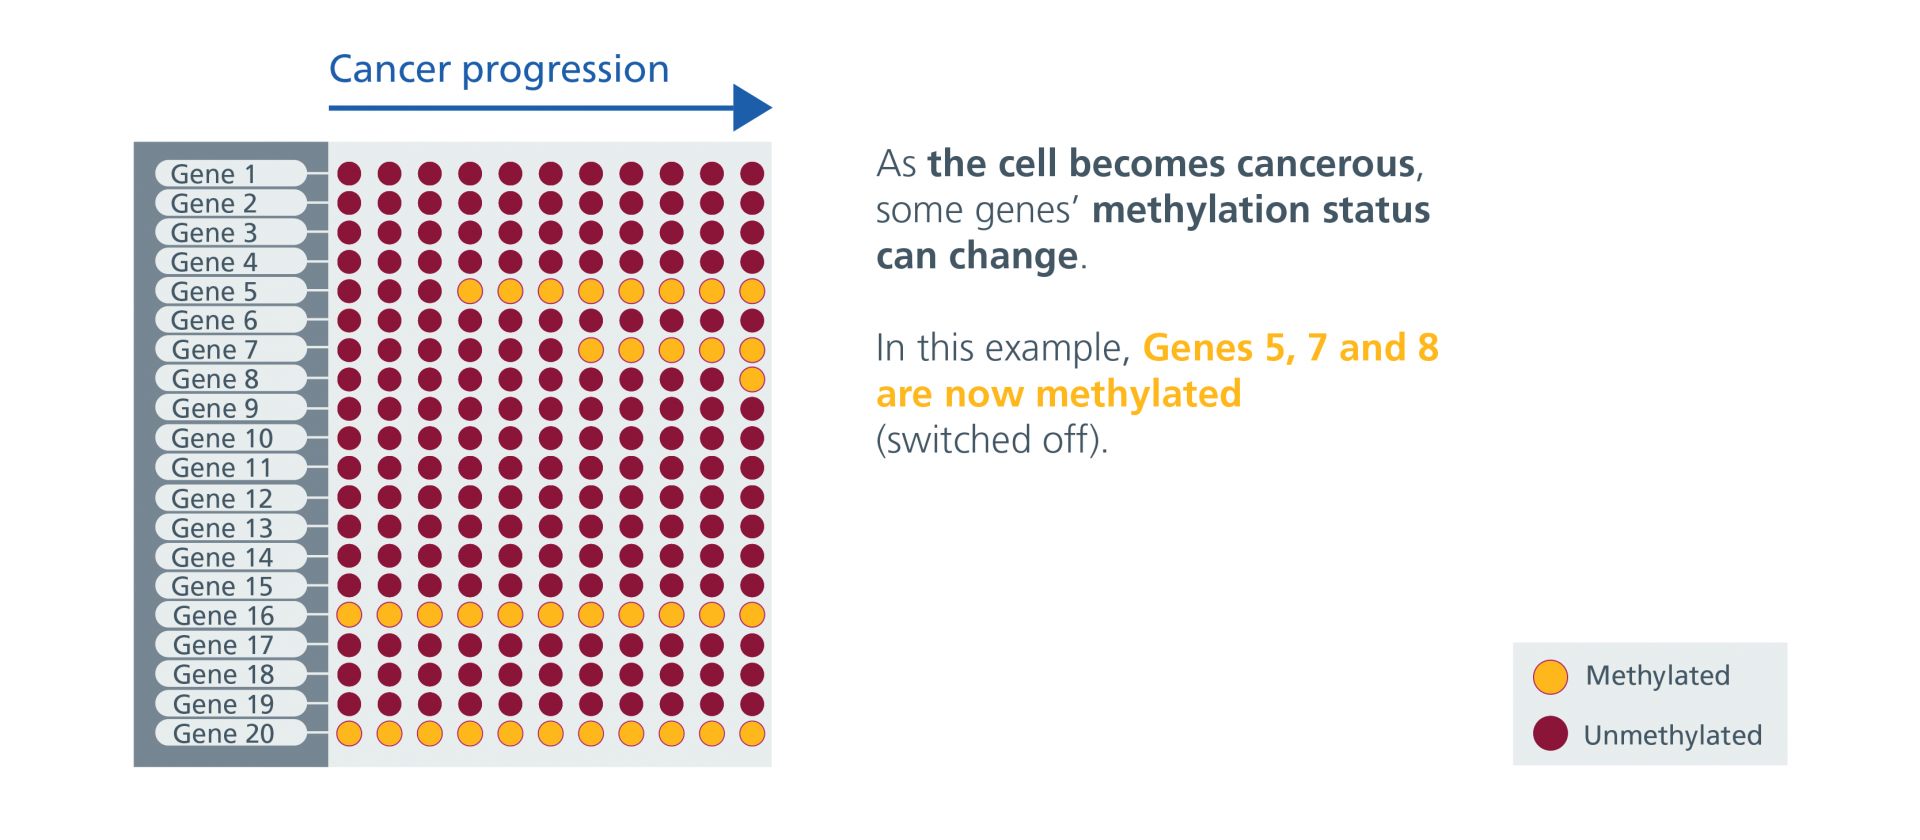 The cell becomes cancerous and the methylation status of some of the 20 genes begins to change. Genes 5, 7 and 8 are now methylated (switched off).